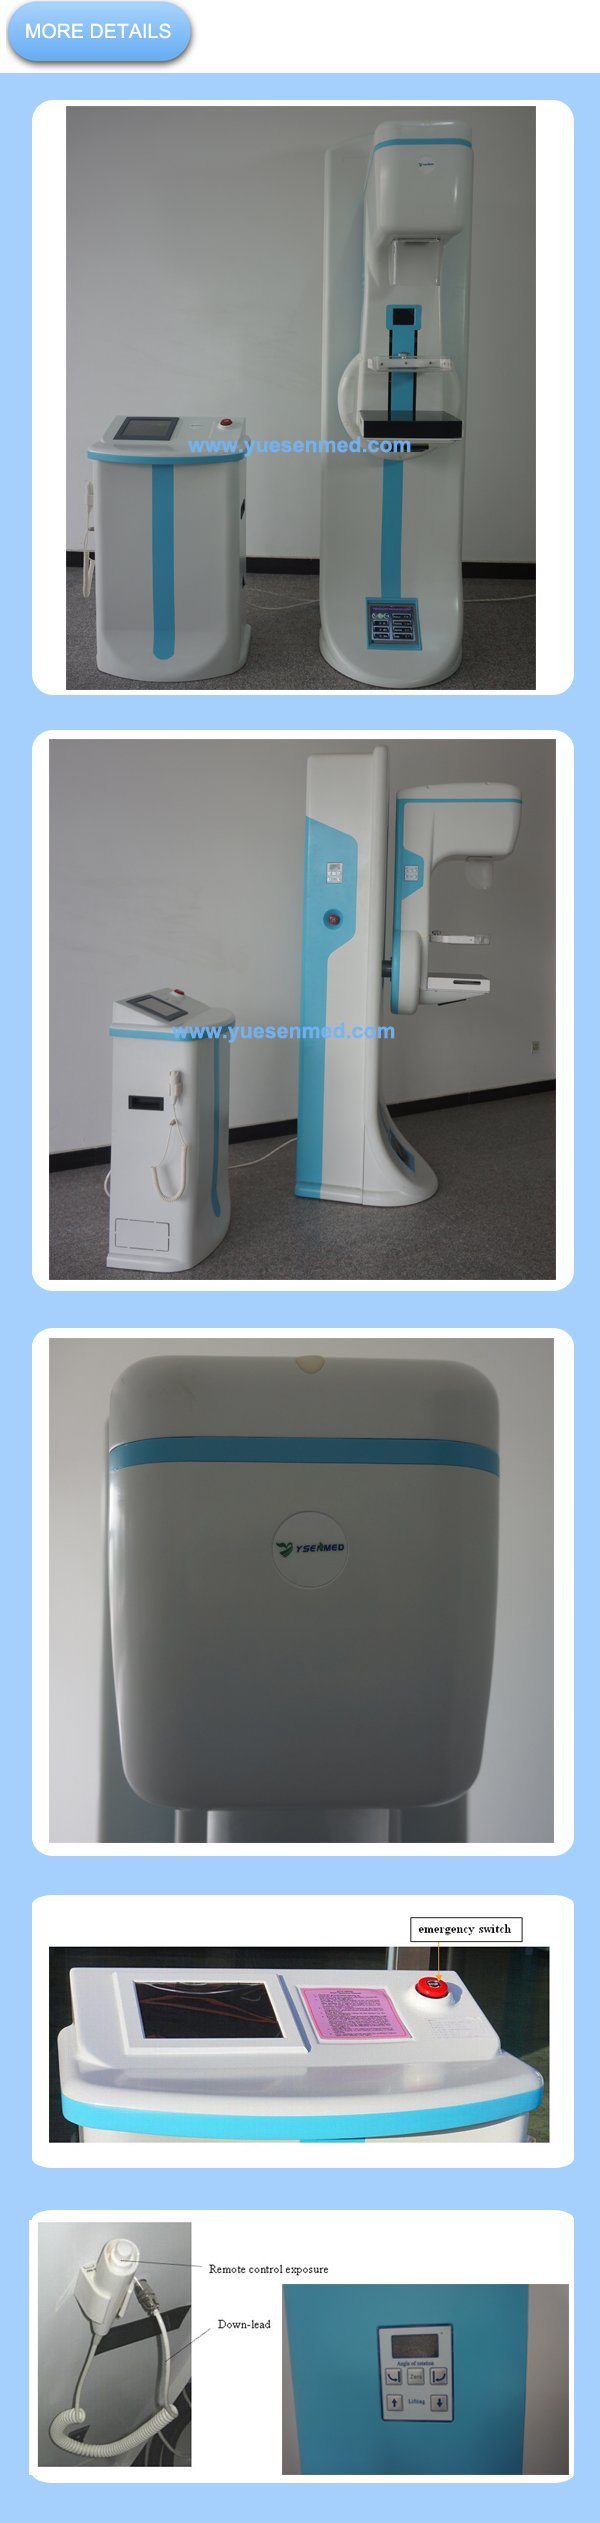 Ysx980d Import Tube High Frequency Mammography X-ray